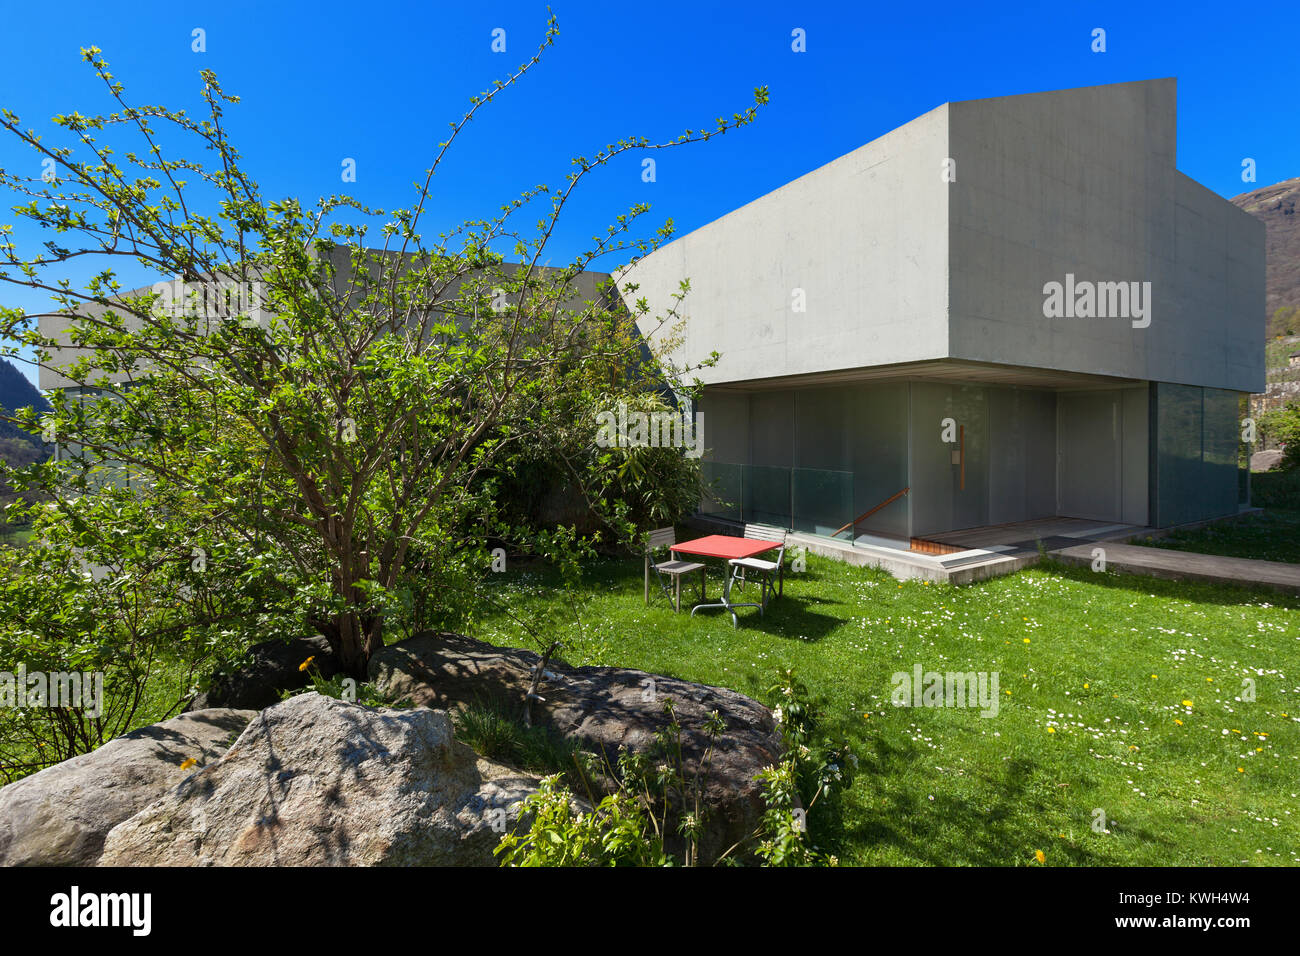 Architecture modern design, concrete house view from the garden Stock Photo